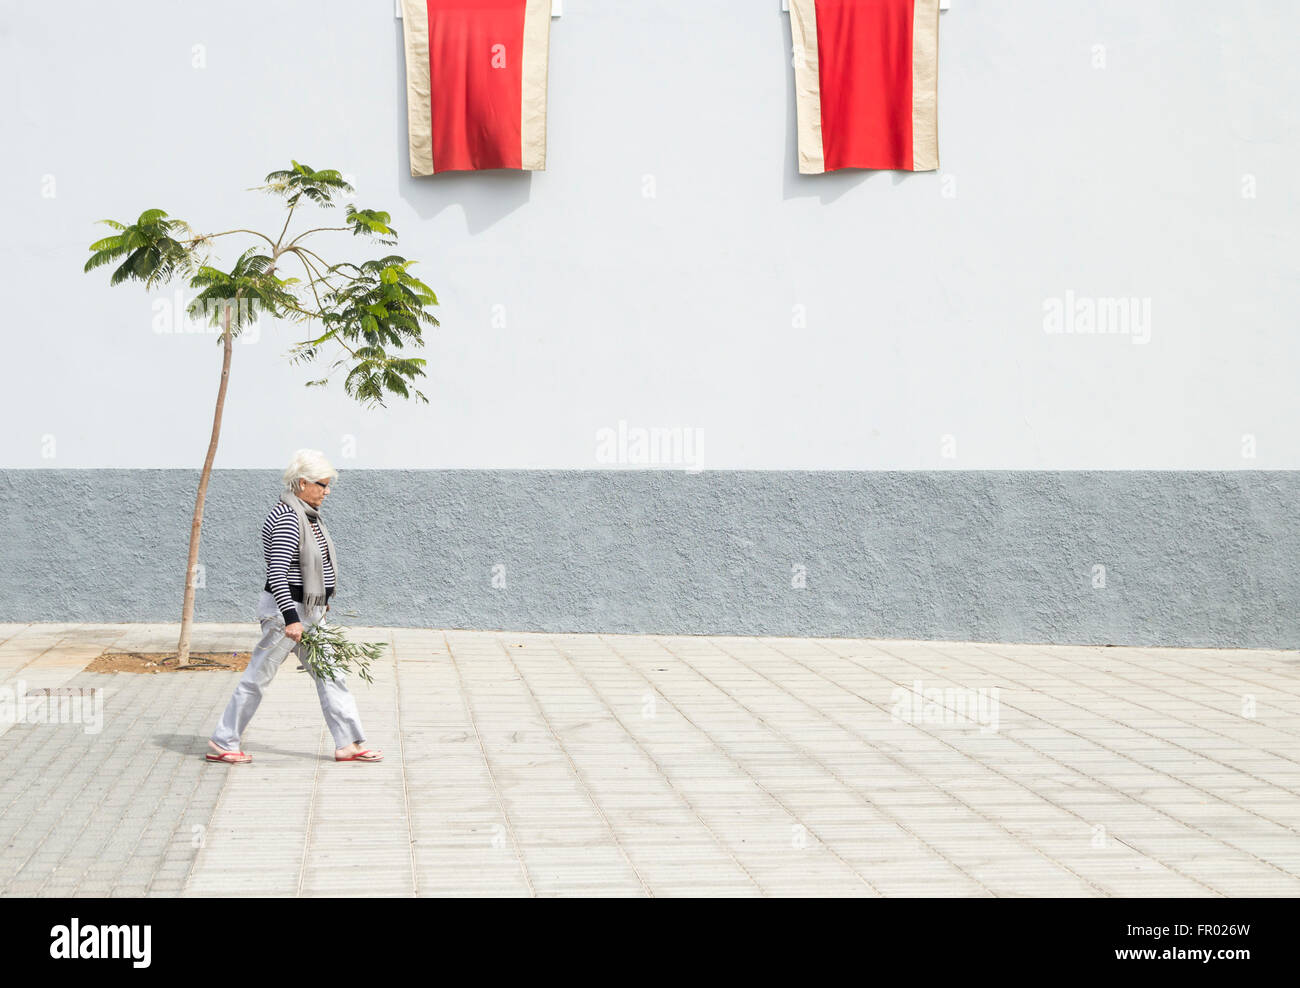 Las Palmas, Gran Canaria, Canary Islands, Spain, 20th March 2016. Palm Sunday procession in Las Palmas, the capital of Gran Canaria. PICTURED: Woman holding Olive branch walks past church on her way to Palm Sunday procession Credit:  Alan Dawson News/Alamy Live News Stock Photo